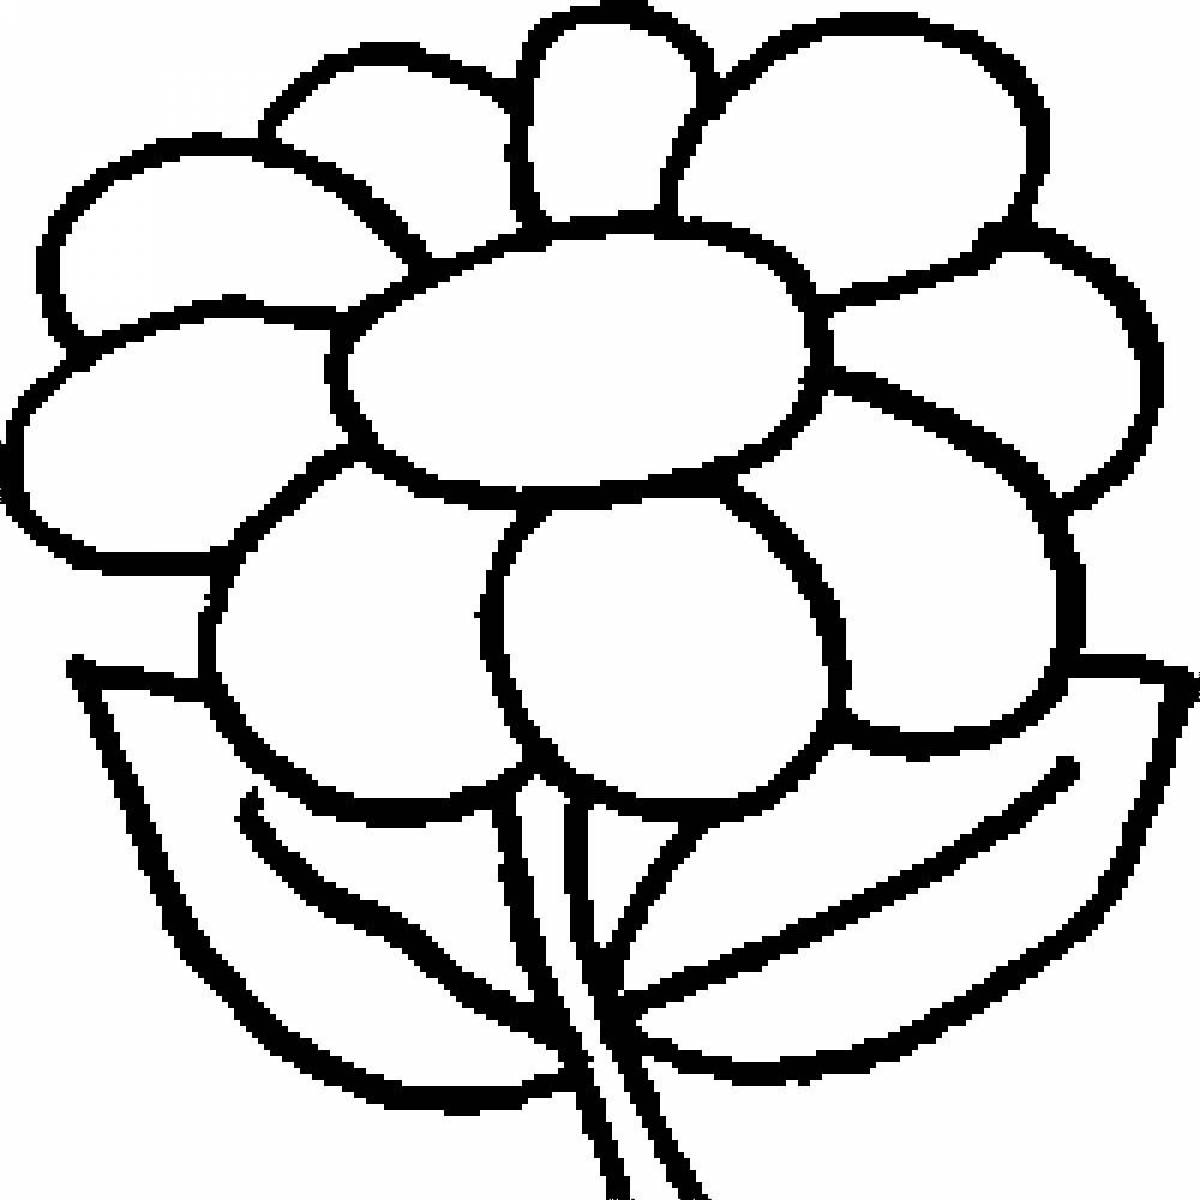 Adorable flower coloring book for kids